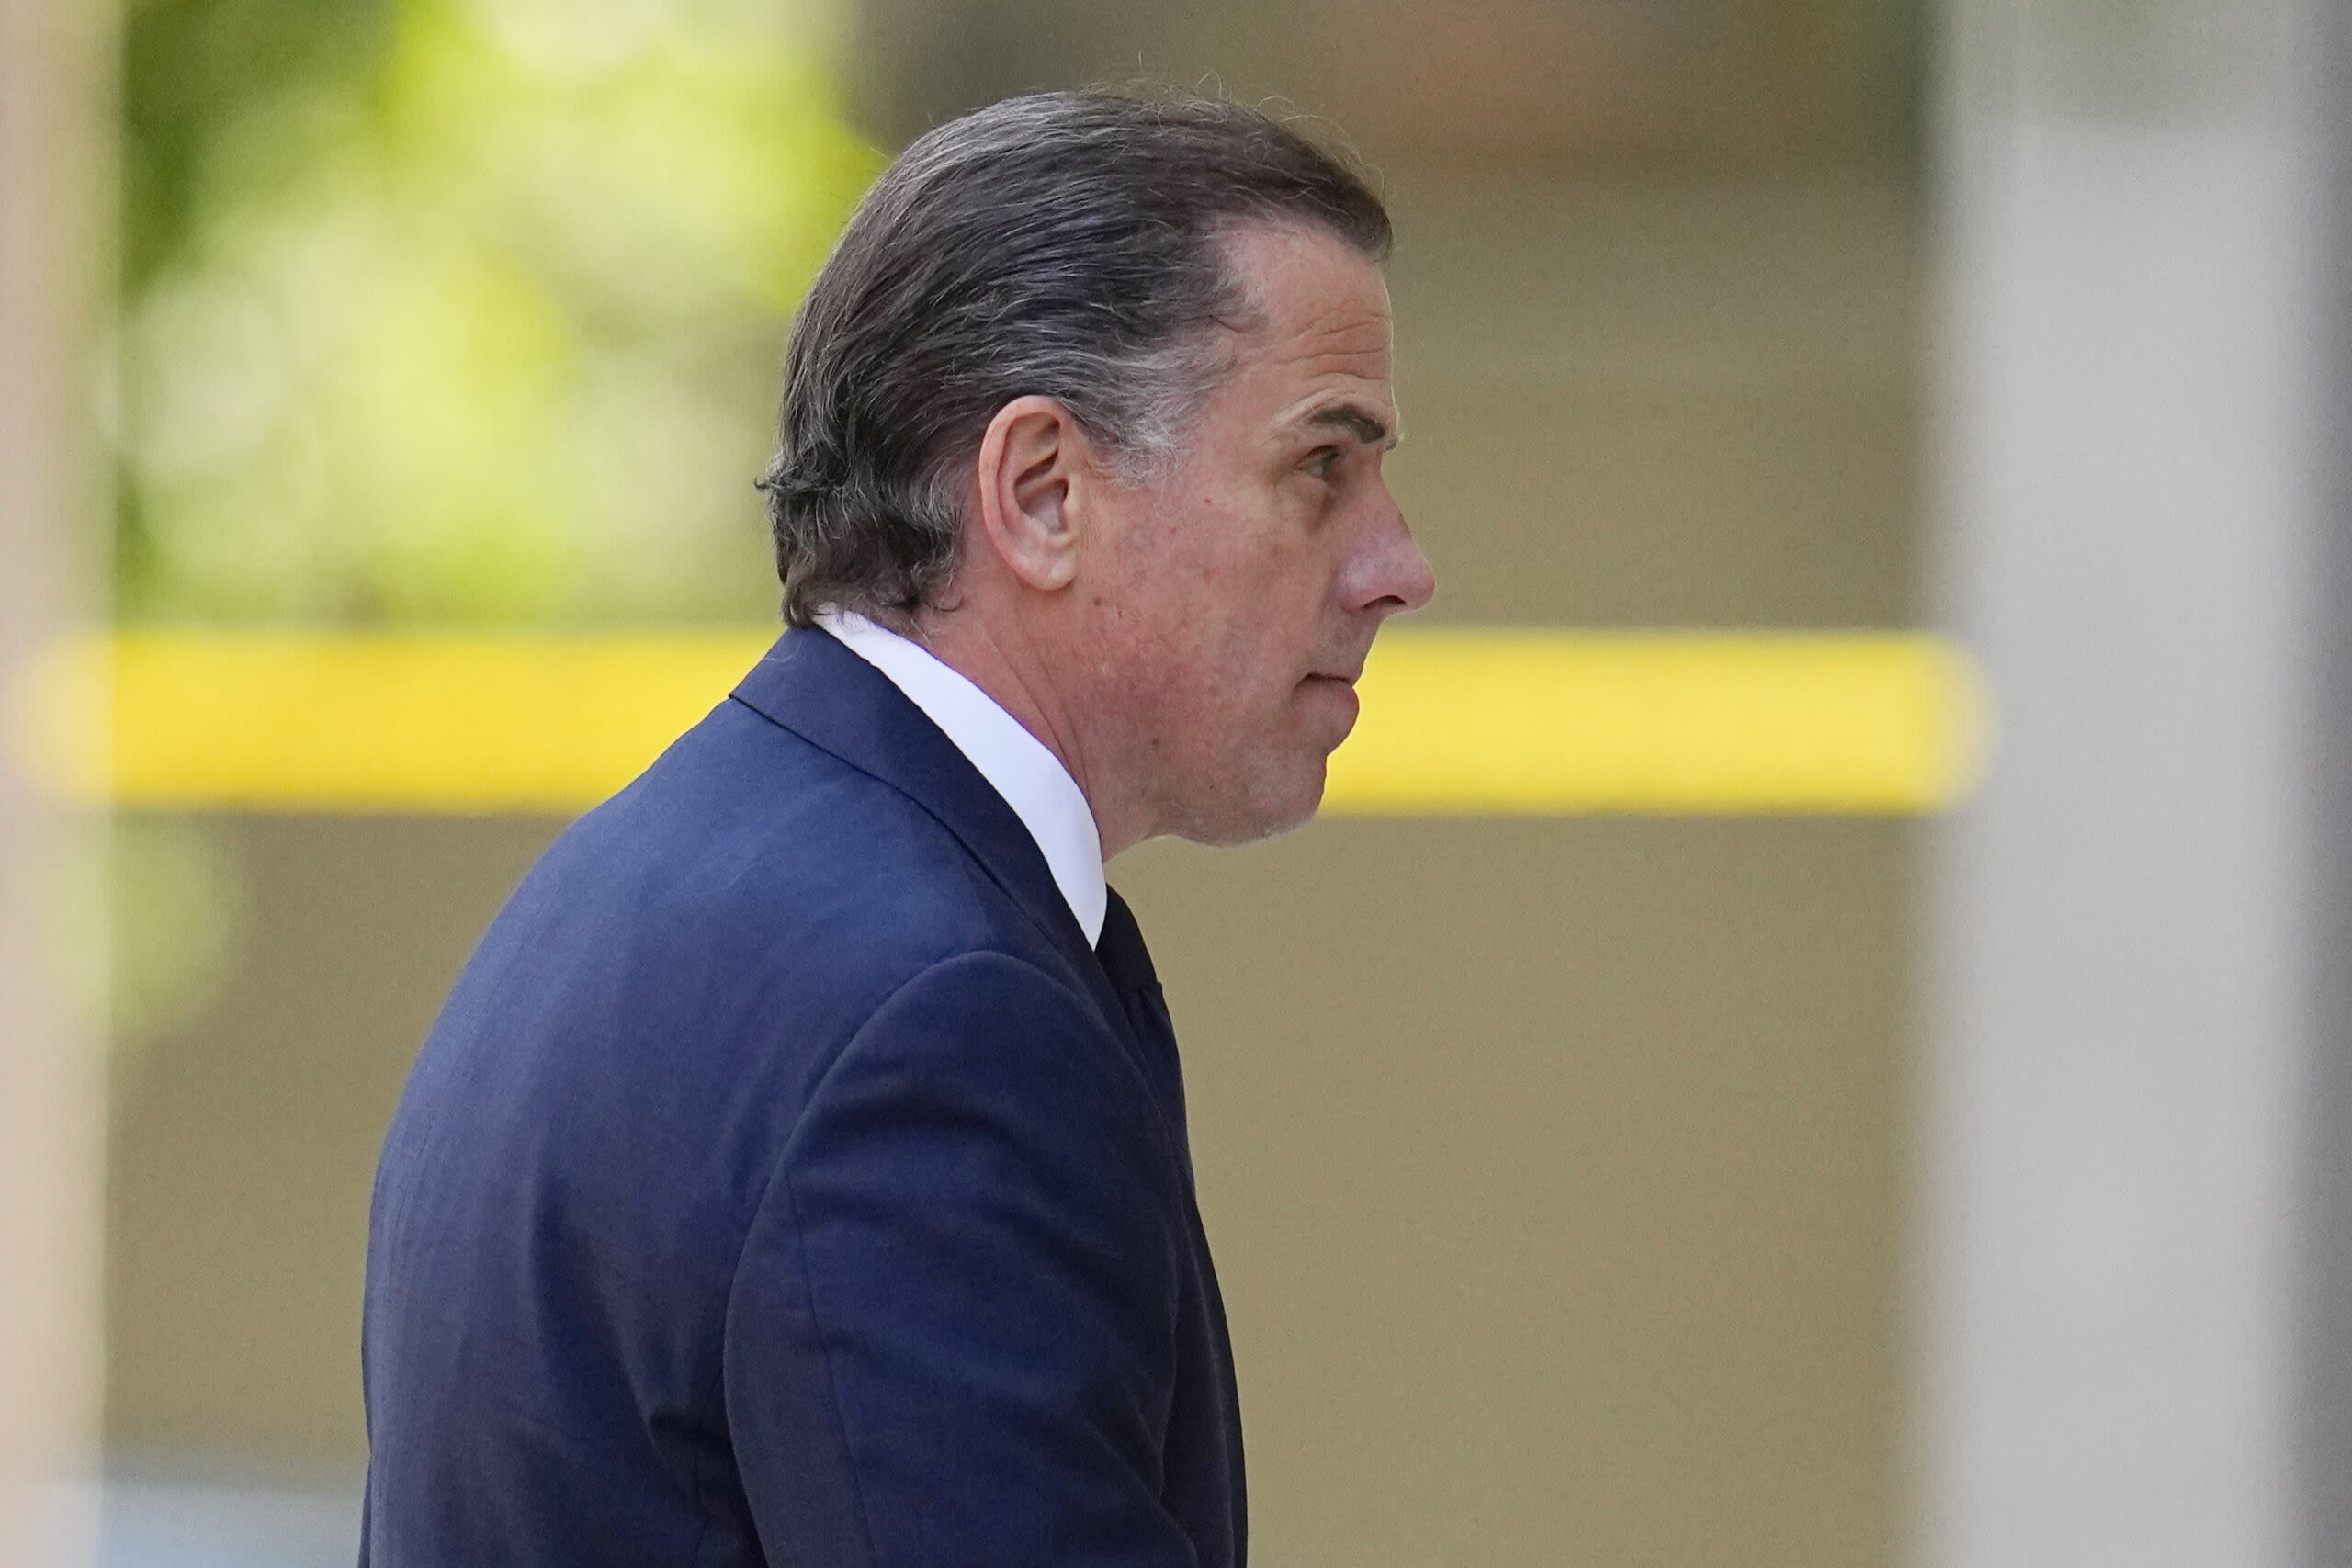 Hunter Biden’s tax trial set for September as judge agrees to delay, with gun trial still in June - Maryland Daily Record